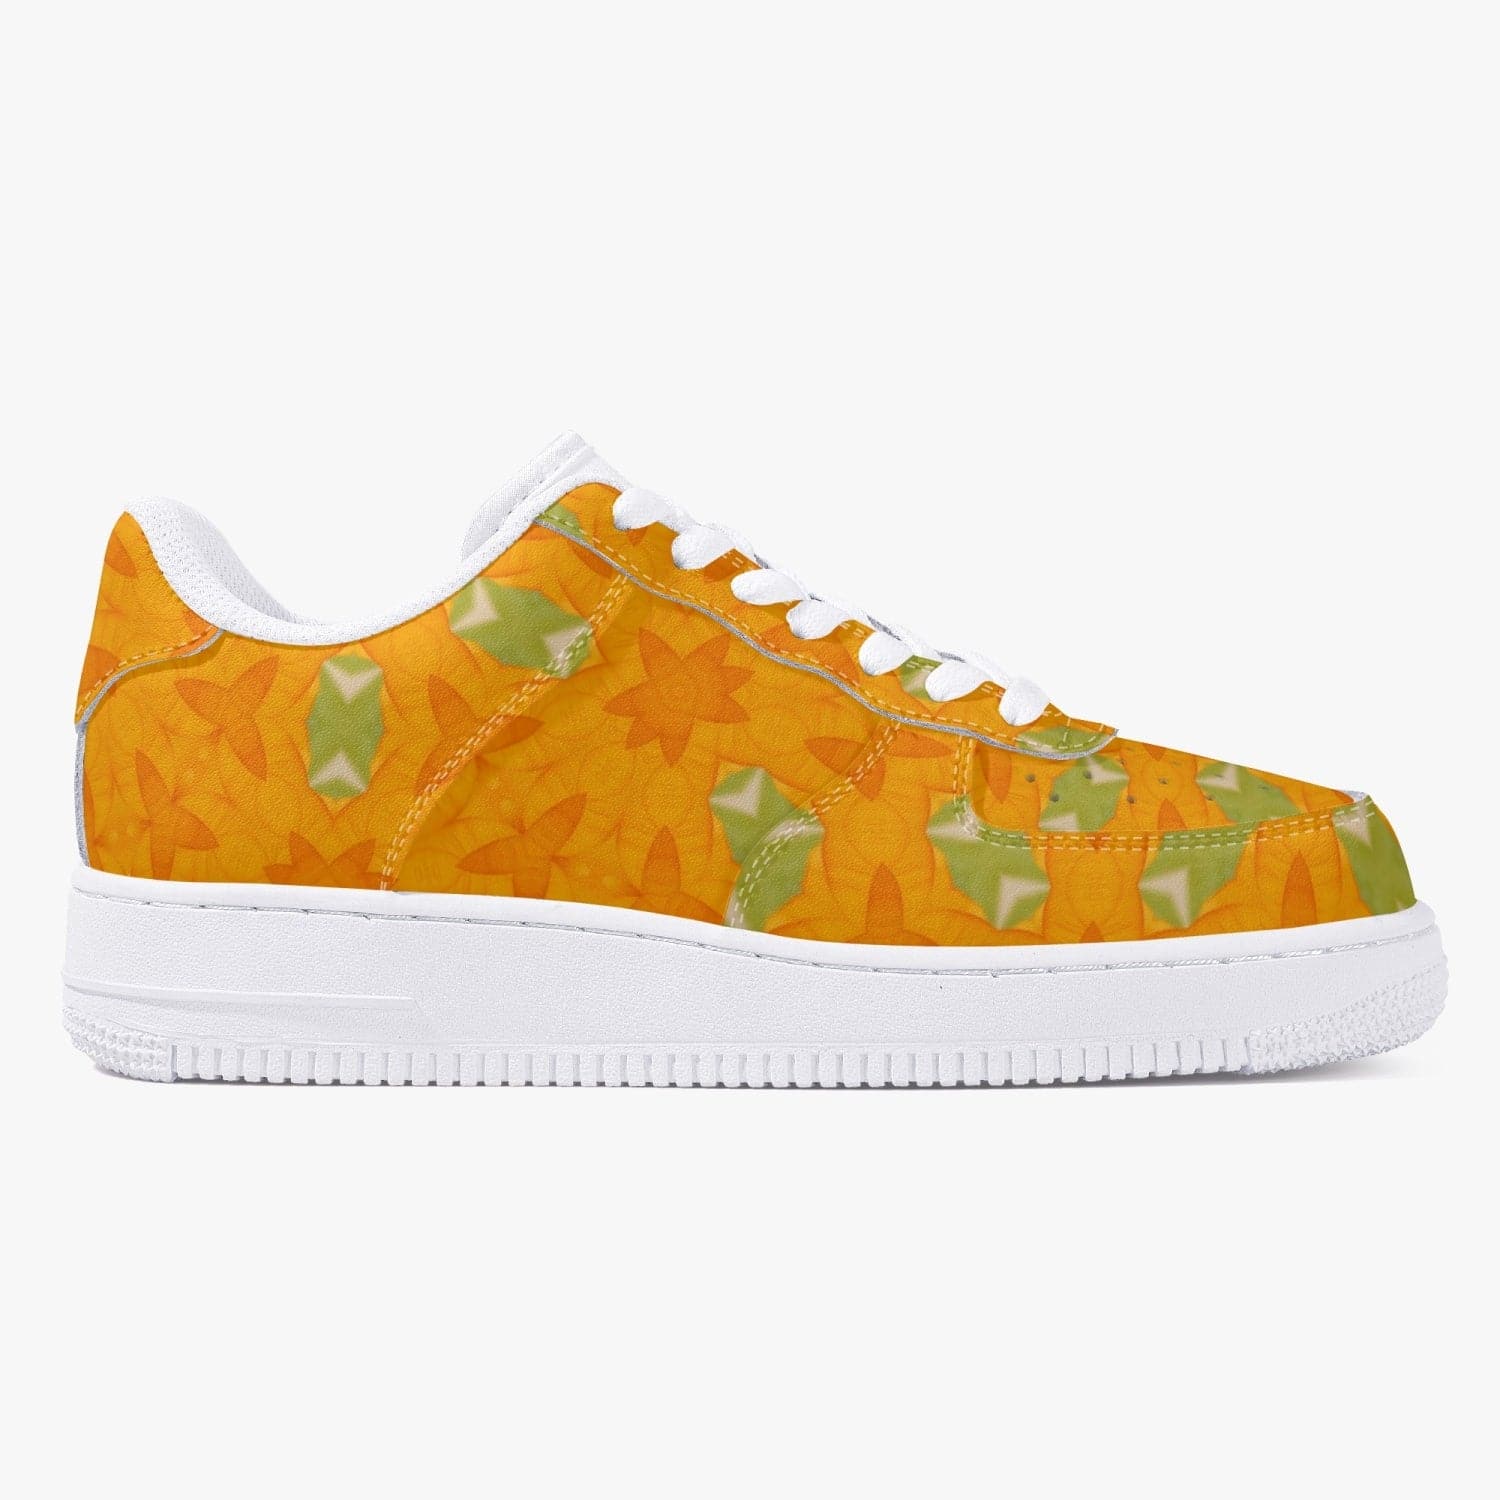 Yellow Buttercups,  Women's New Low-Top Leather Sports Sneakers, by Sensus Studio Design